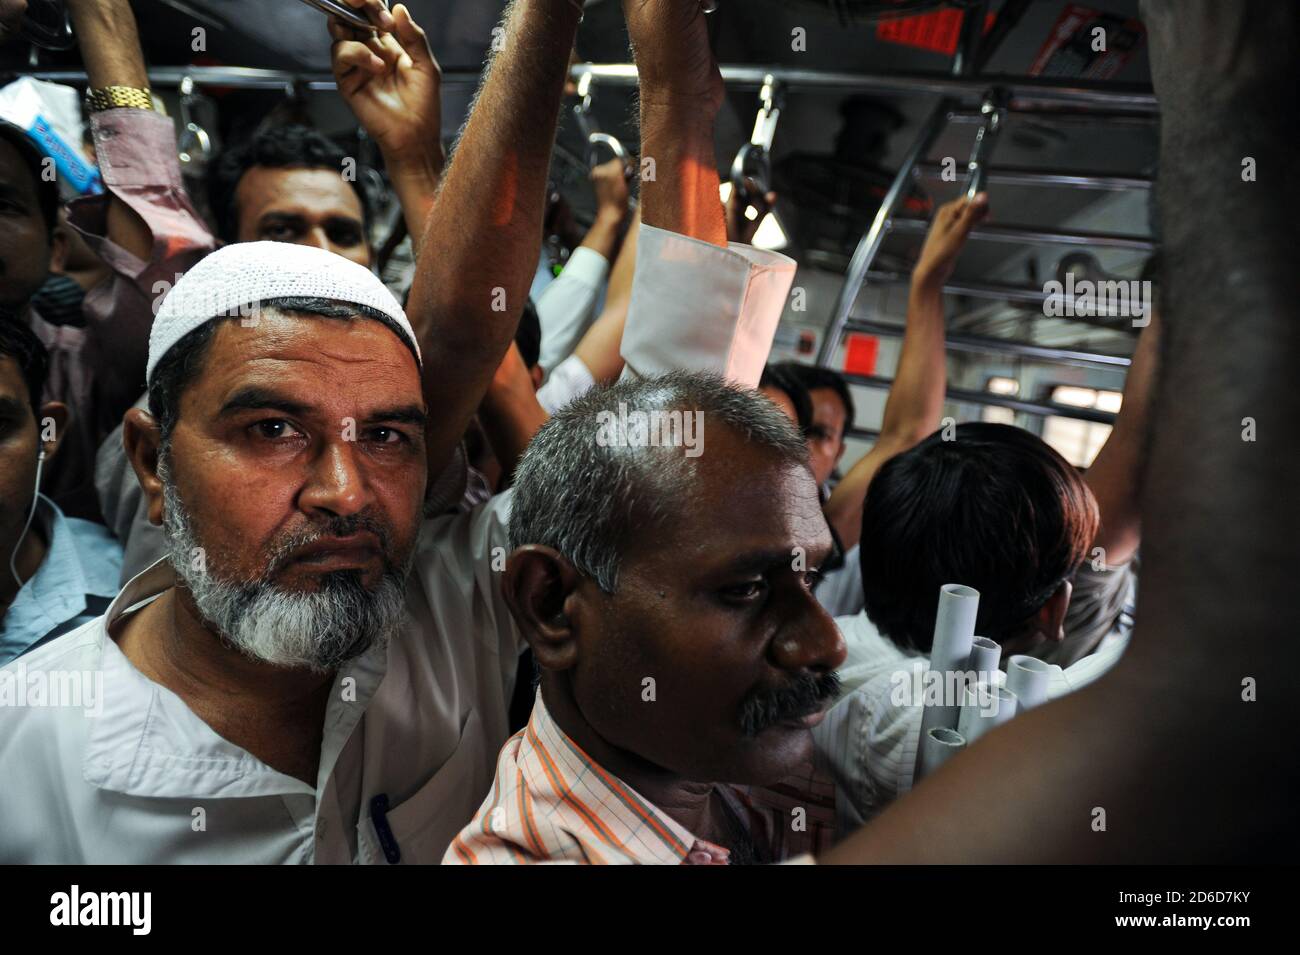 08.12.2011, Mumbai, Maharashtra, India - Commuters during rush hour in a completely overcrowded local train, which connects the center of the Indian m Stock Photo